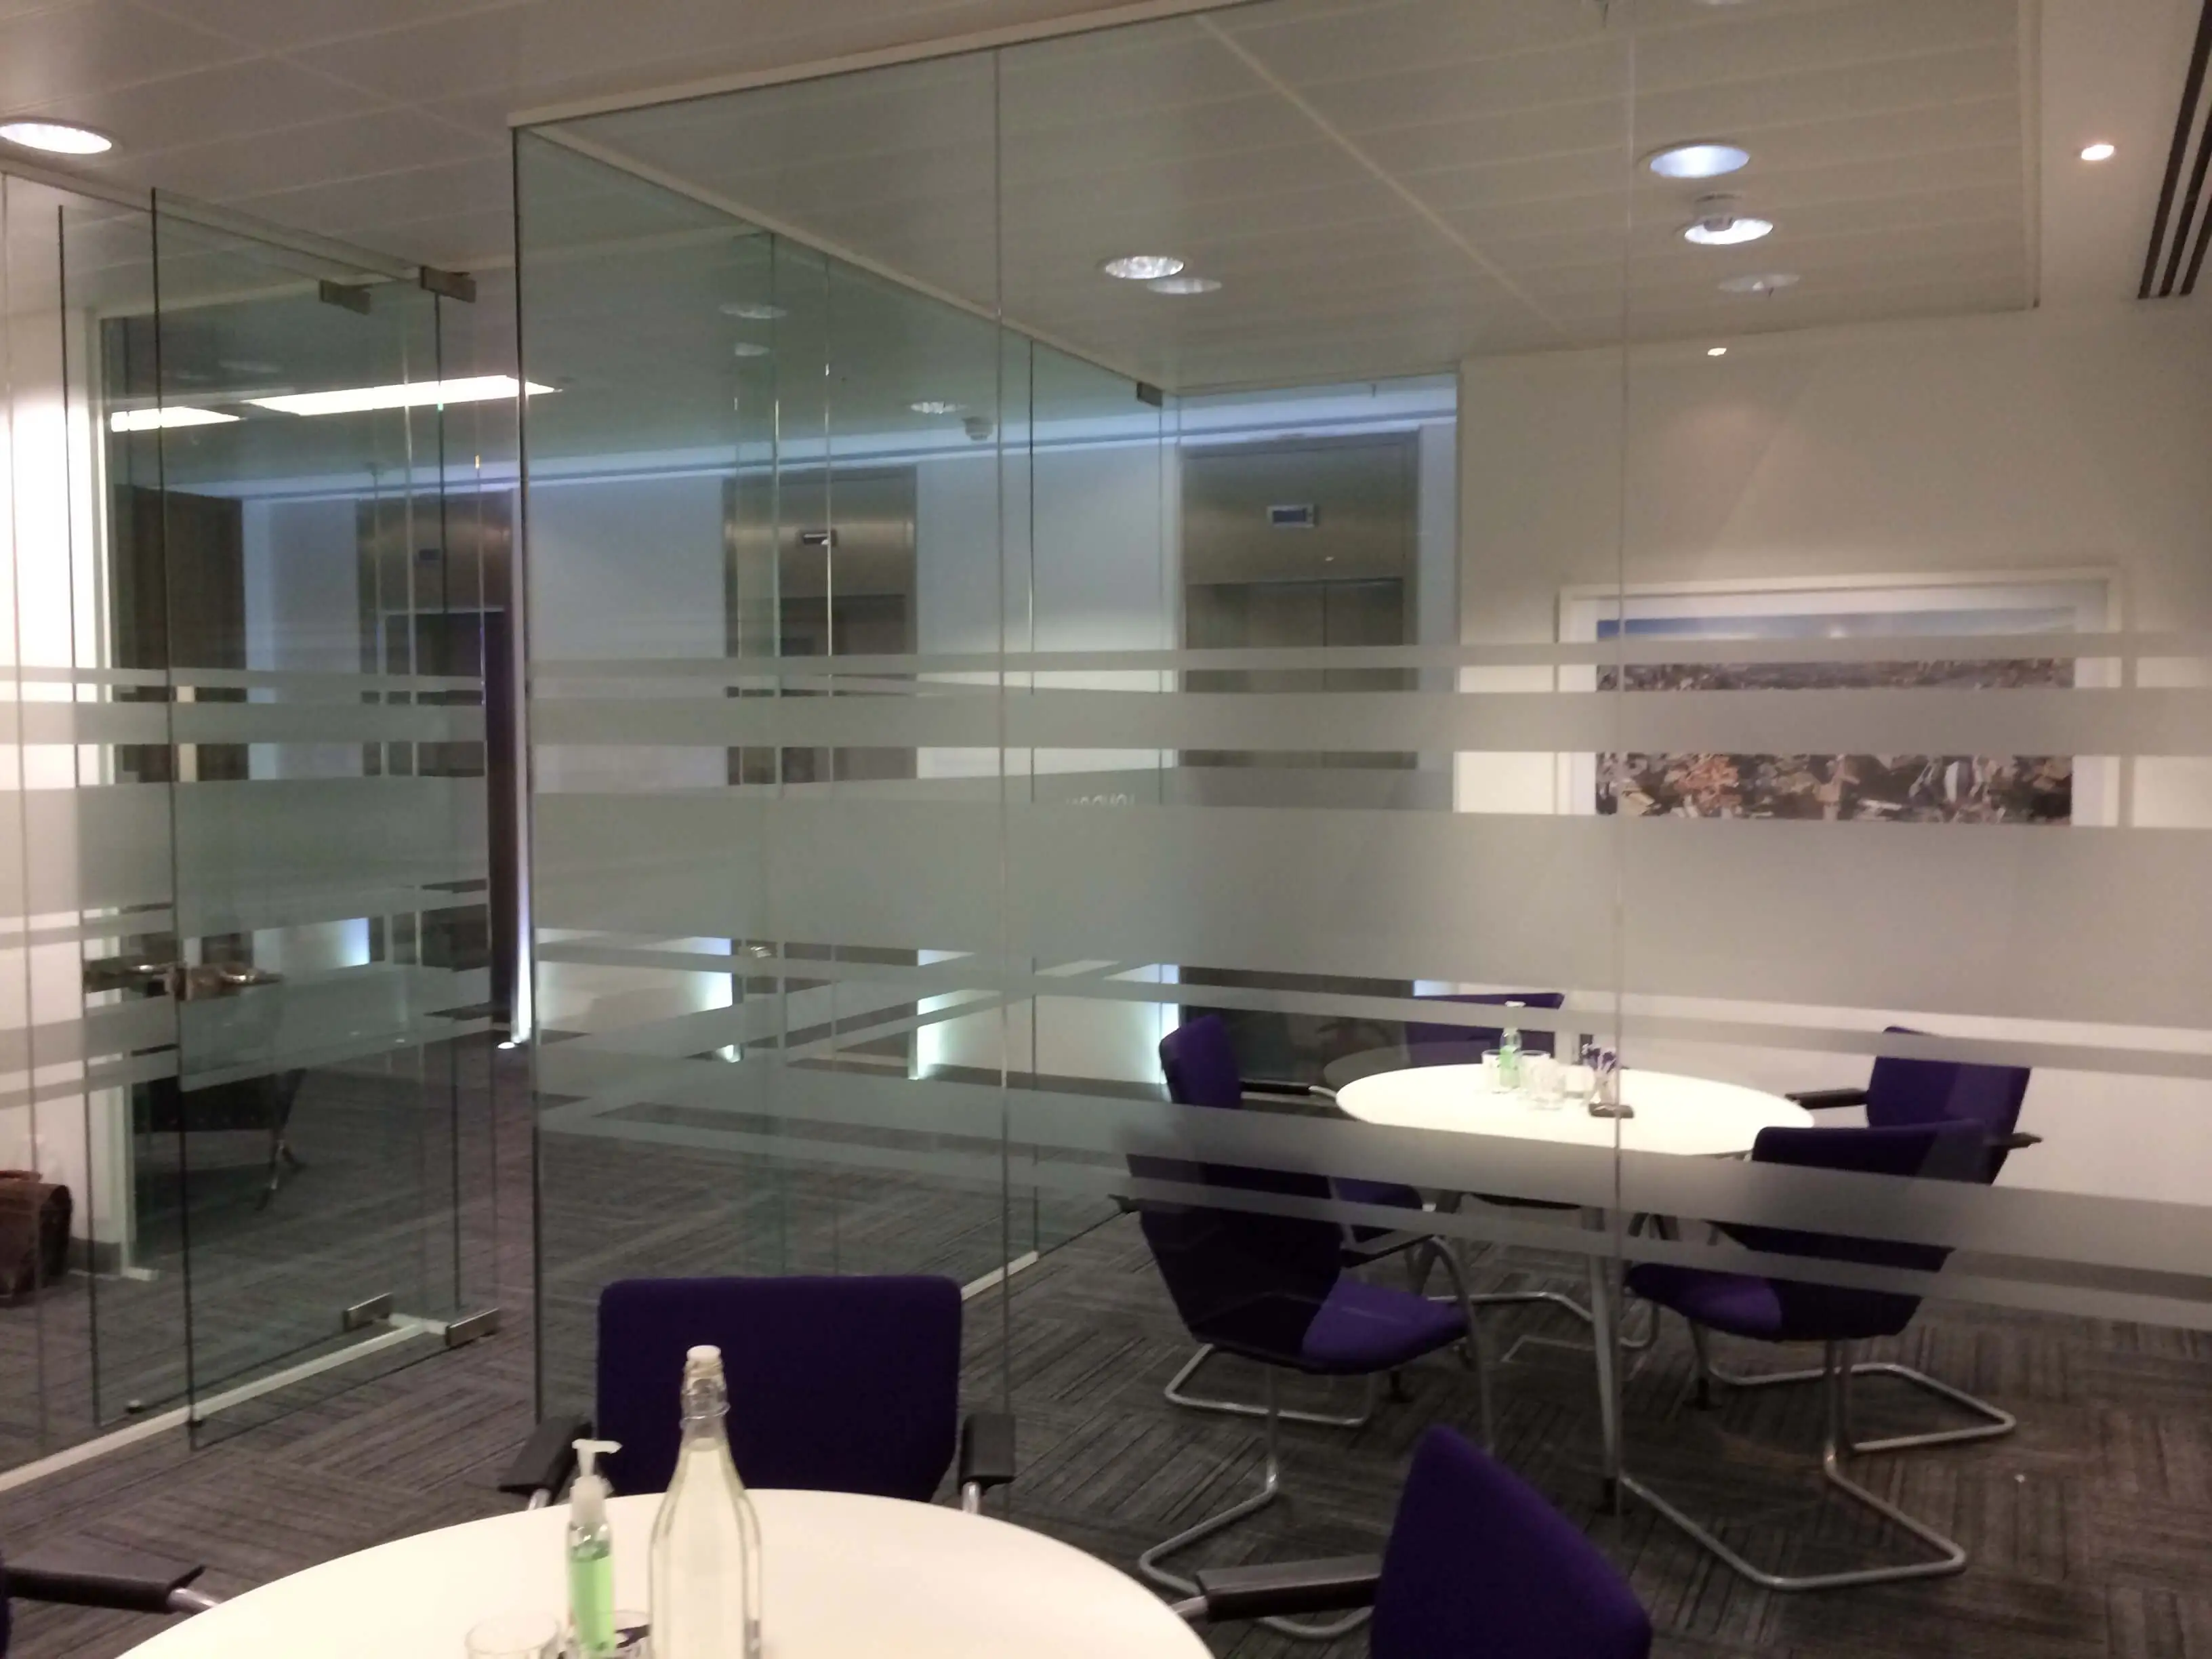 Designer glass walls to divide office spaces